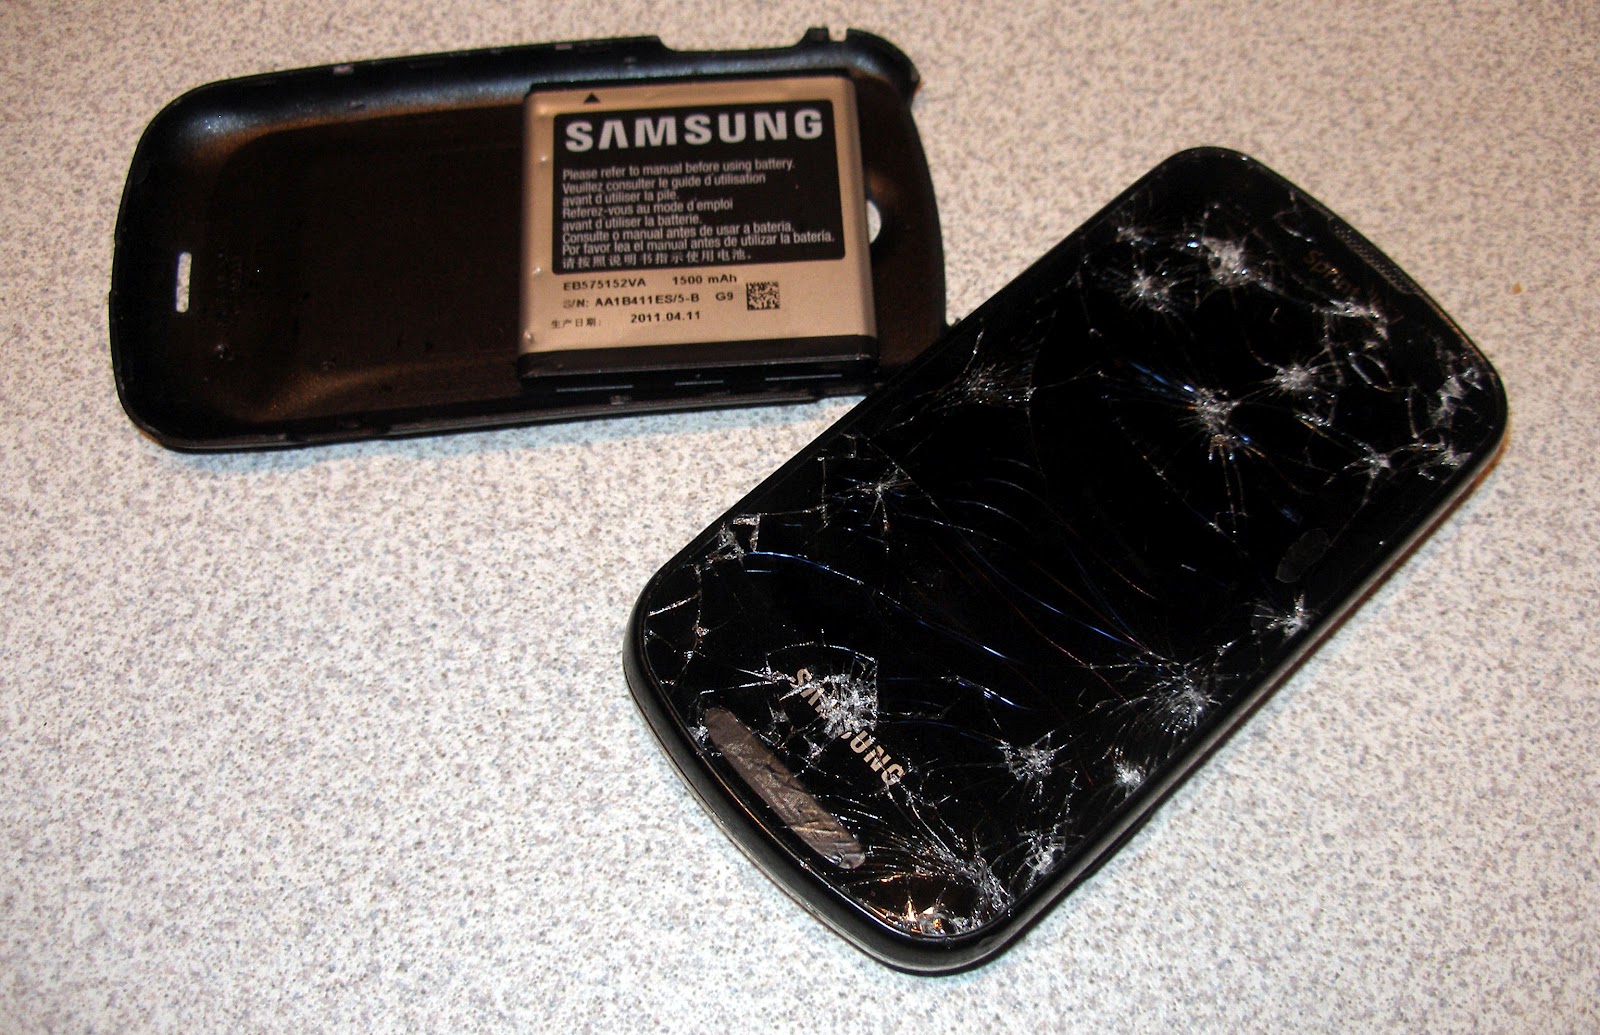 ... Smart Phone Bites the Dust (Or, Why Cell Phone Insurance is a Scam